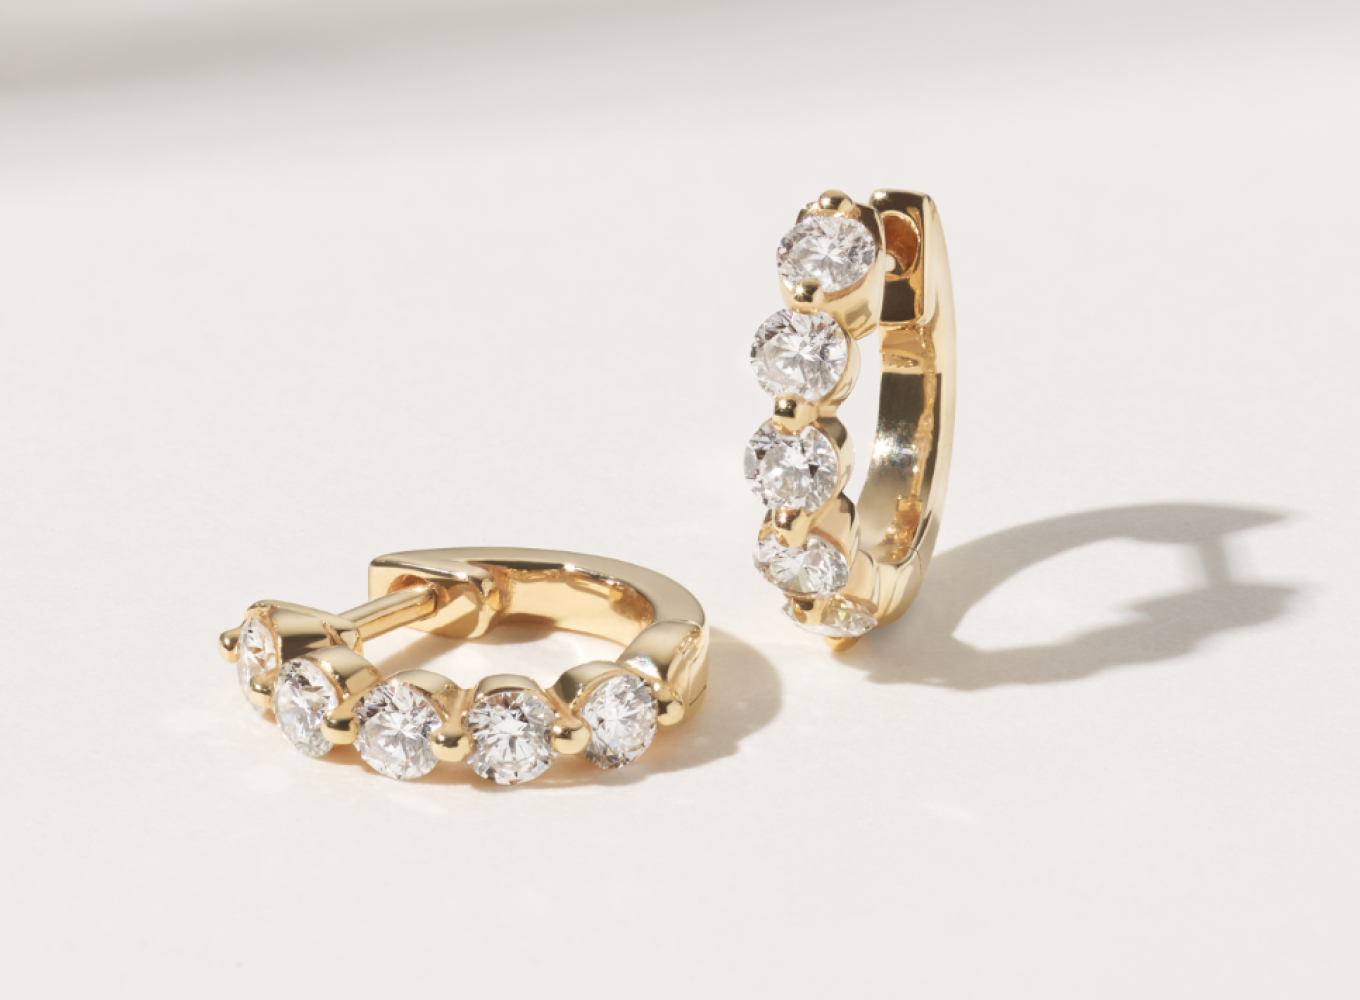 Terra 0.40 tcw Diamond Huggie Hoops A minimal yet secure single-prong setting showcases the gorgeous round shape and superior sparkle and fire of the natural diamonds along these huggie hoop earrings. Crafted in warm 14-karat yellow gold, a hinge back keeps these beauties secure.